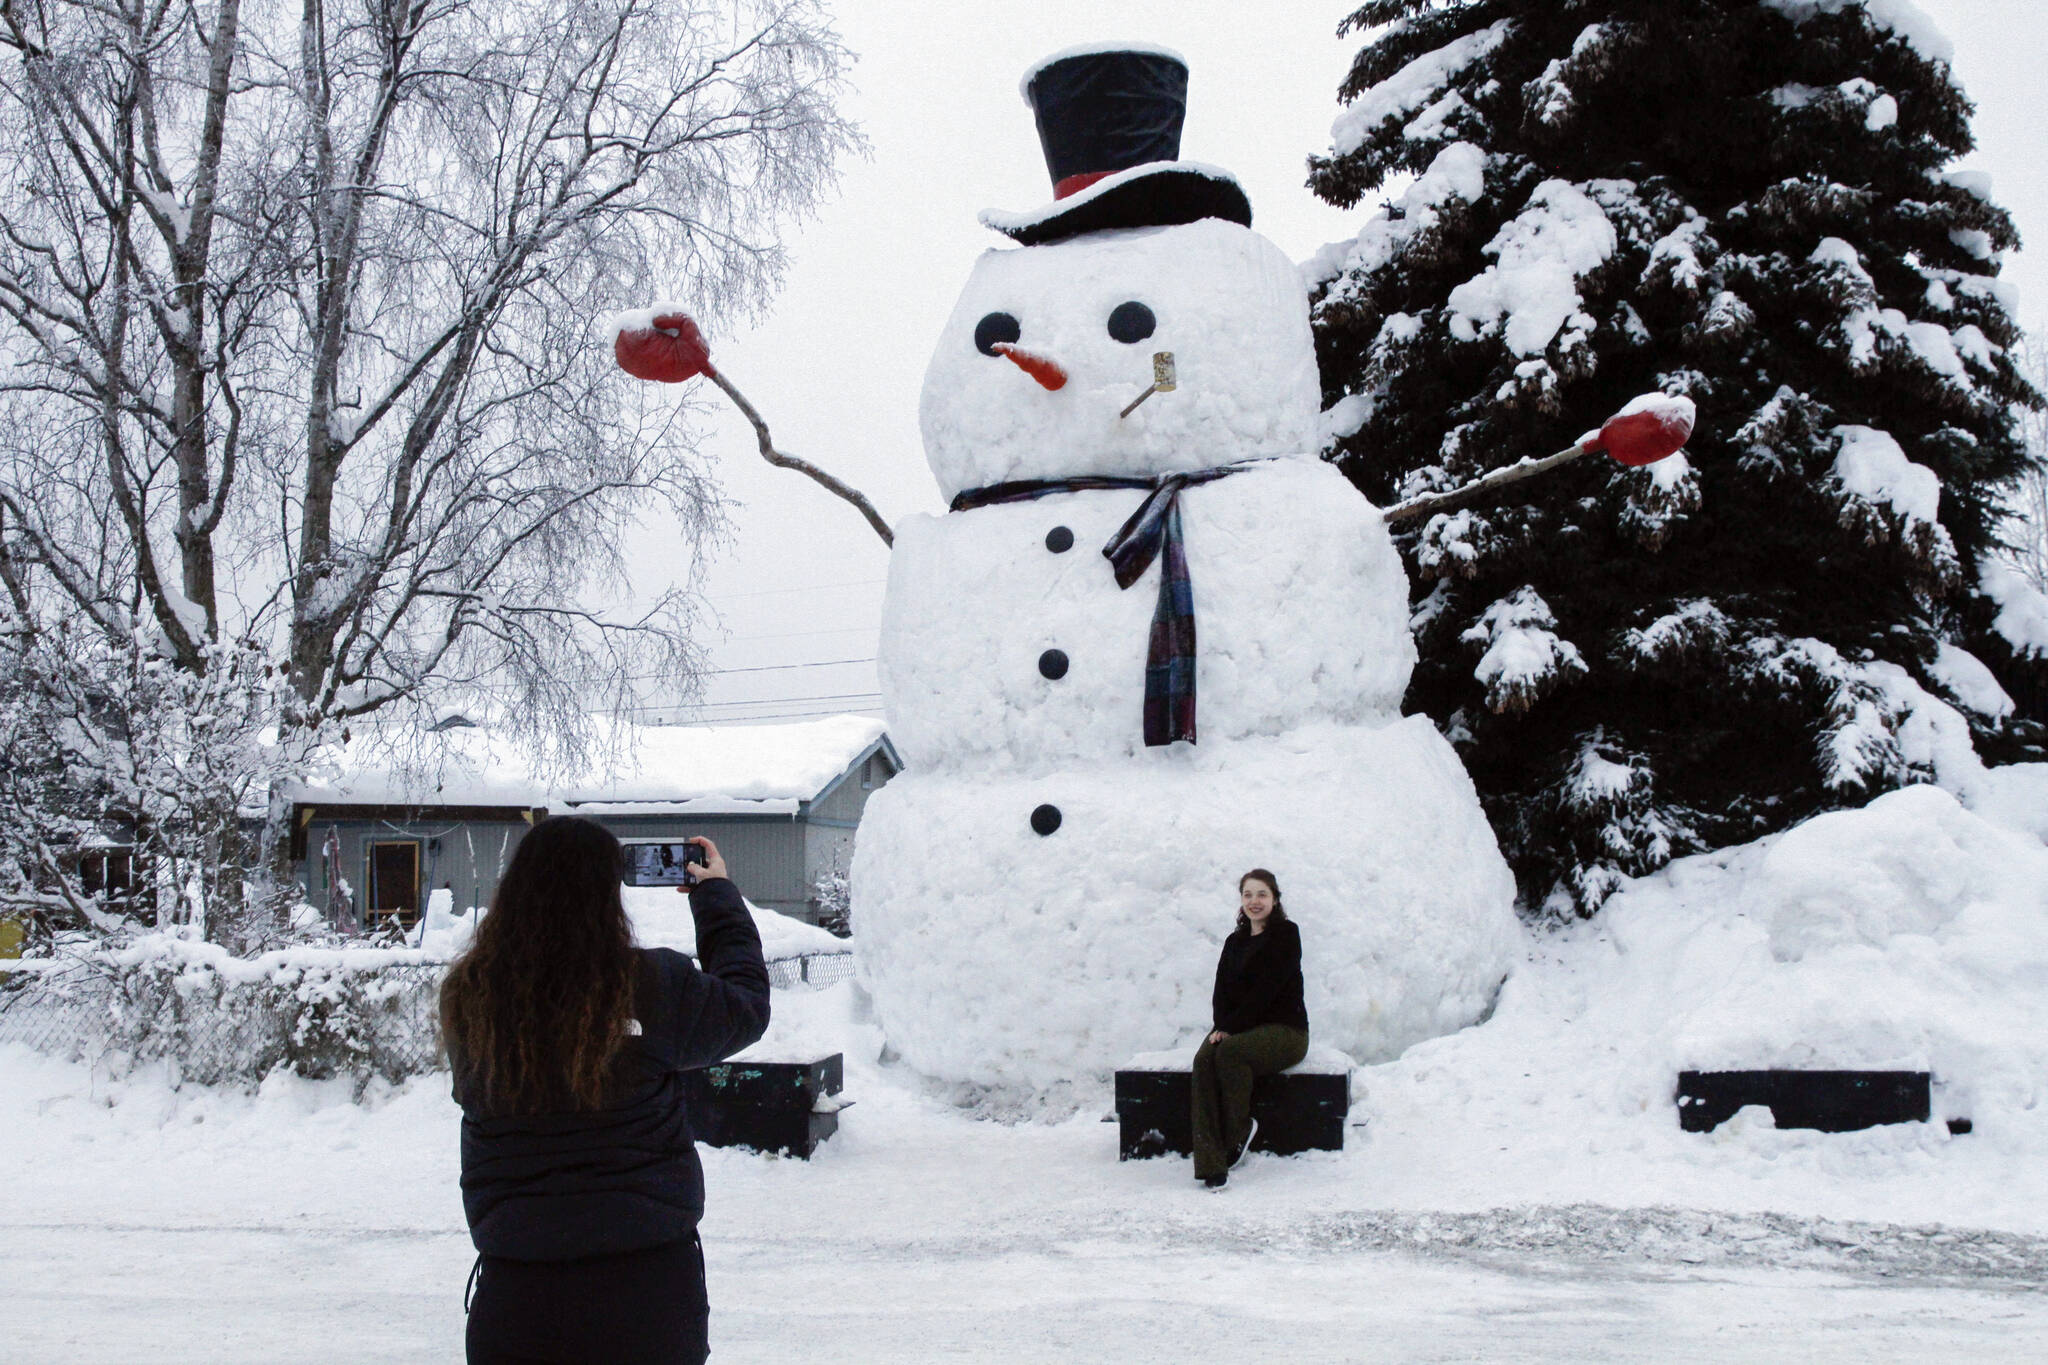 Isil Mico takes a photo of her sister-in-law Oznur Mico in front of Snowzilla, a snowman measuring more than 20 feet tall, in Anchorage, Alaska on Jan. 10, 2024. A recent storm dropped nearly 16 inches of snow on Anchorage, bringing the seasonal total to over 103 inches. It’s the earliest Alaska’s largest city has reached the 100-inch mark. (AP Photo/Mark Thiessen, File)